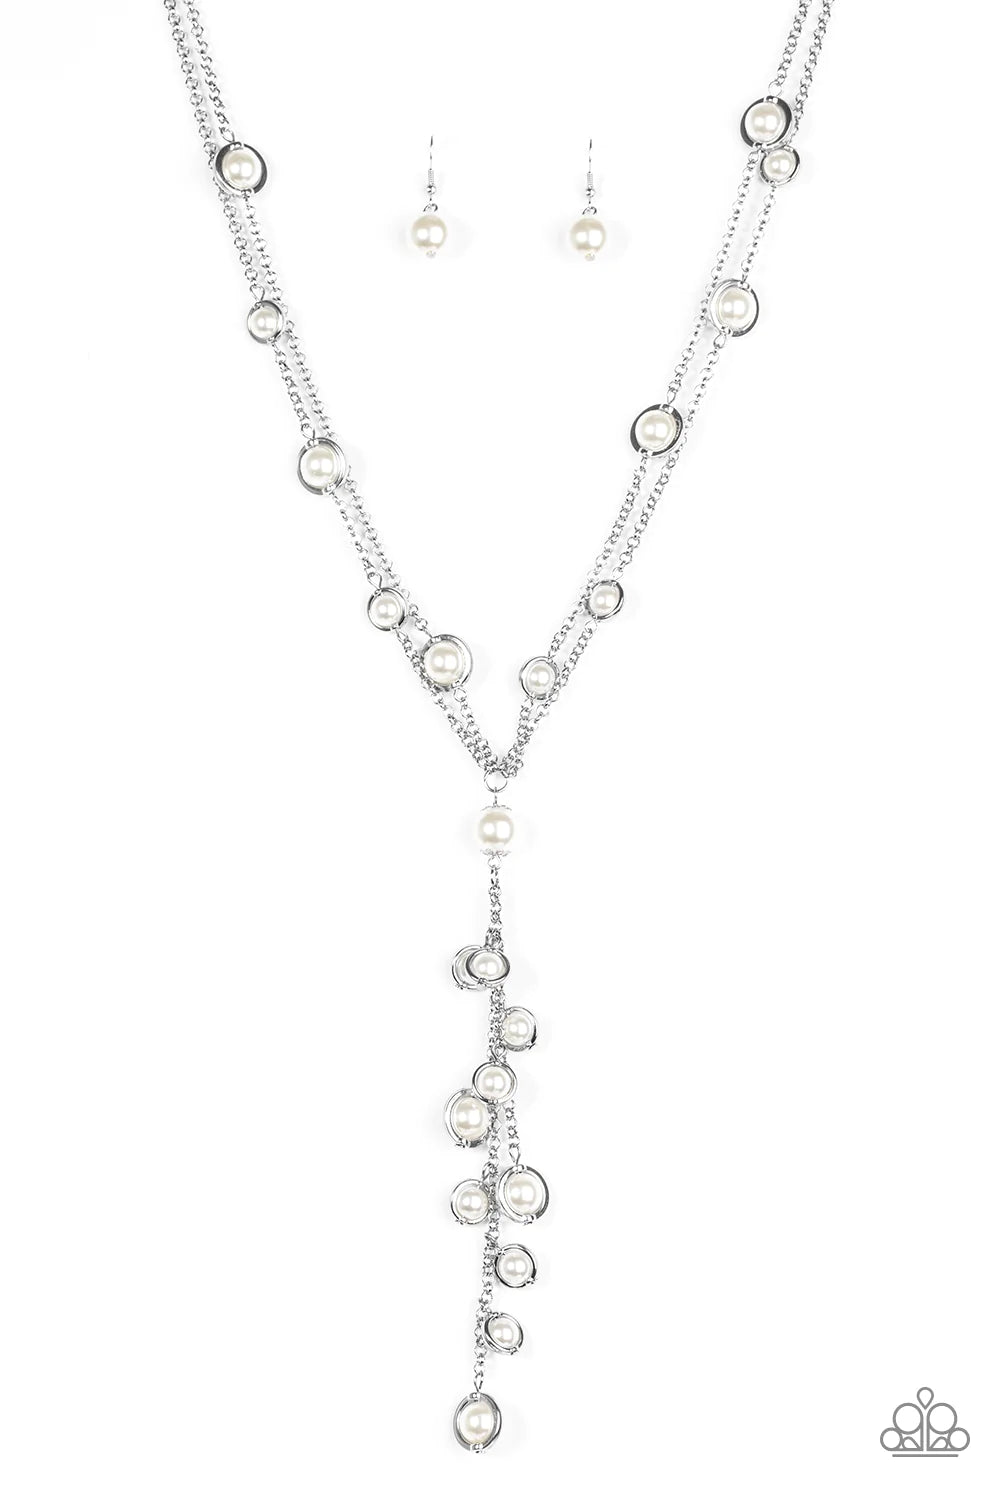 Paparazzi Necklace ~ The FAME Changer - White